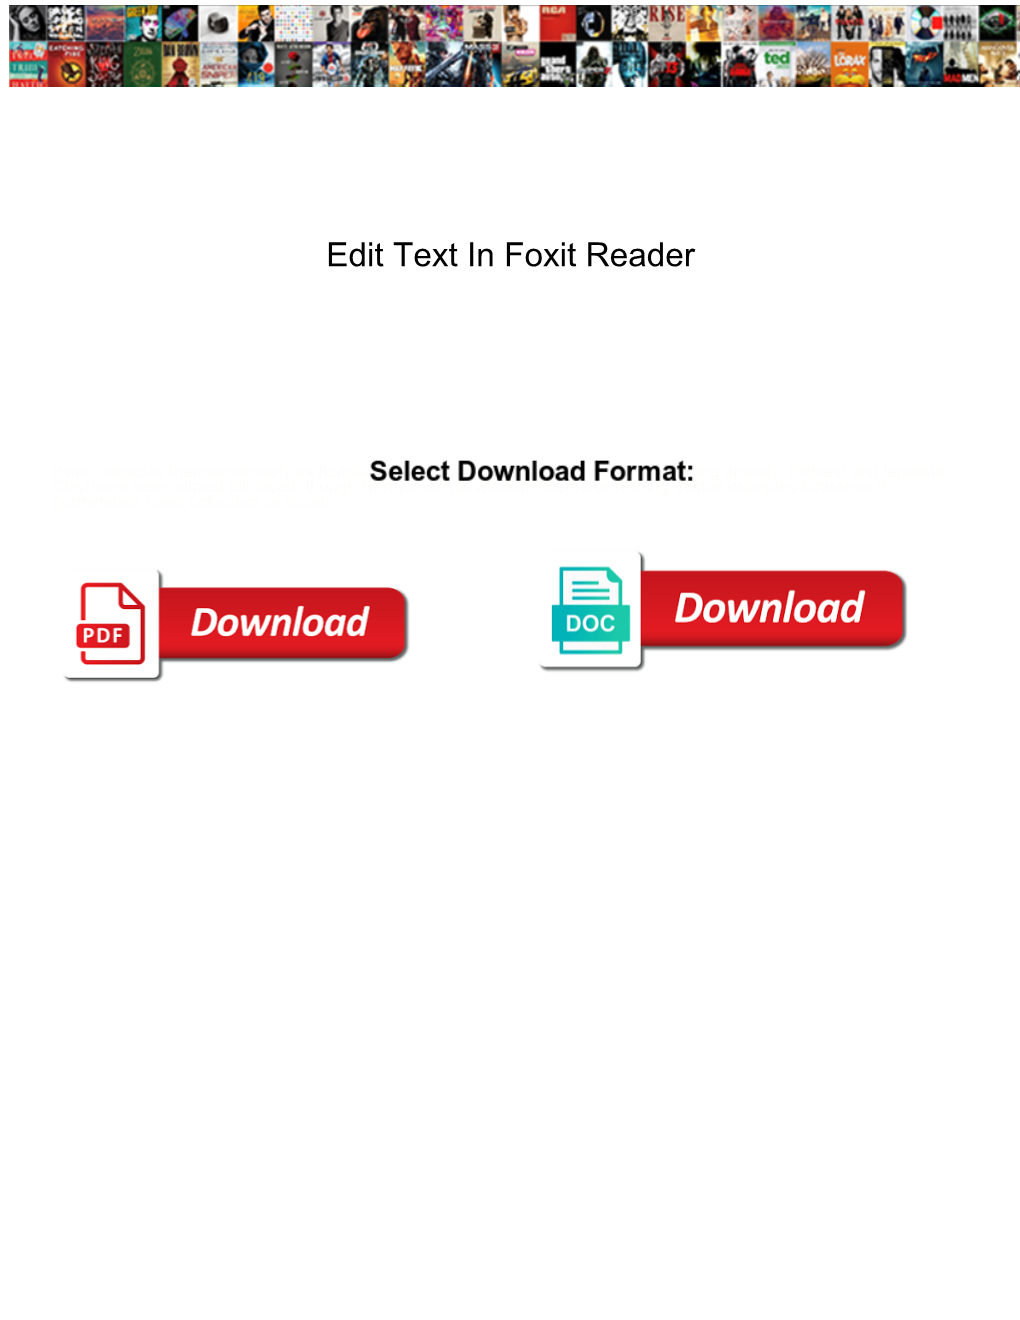 Edit Text in Foxit Reader